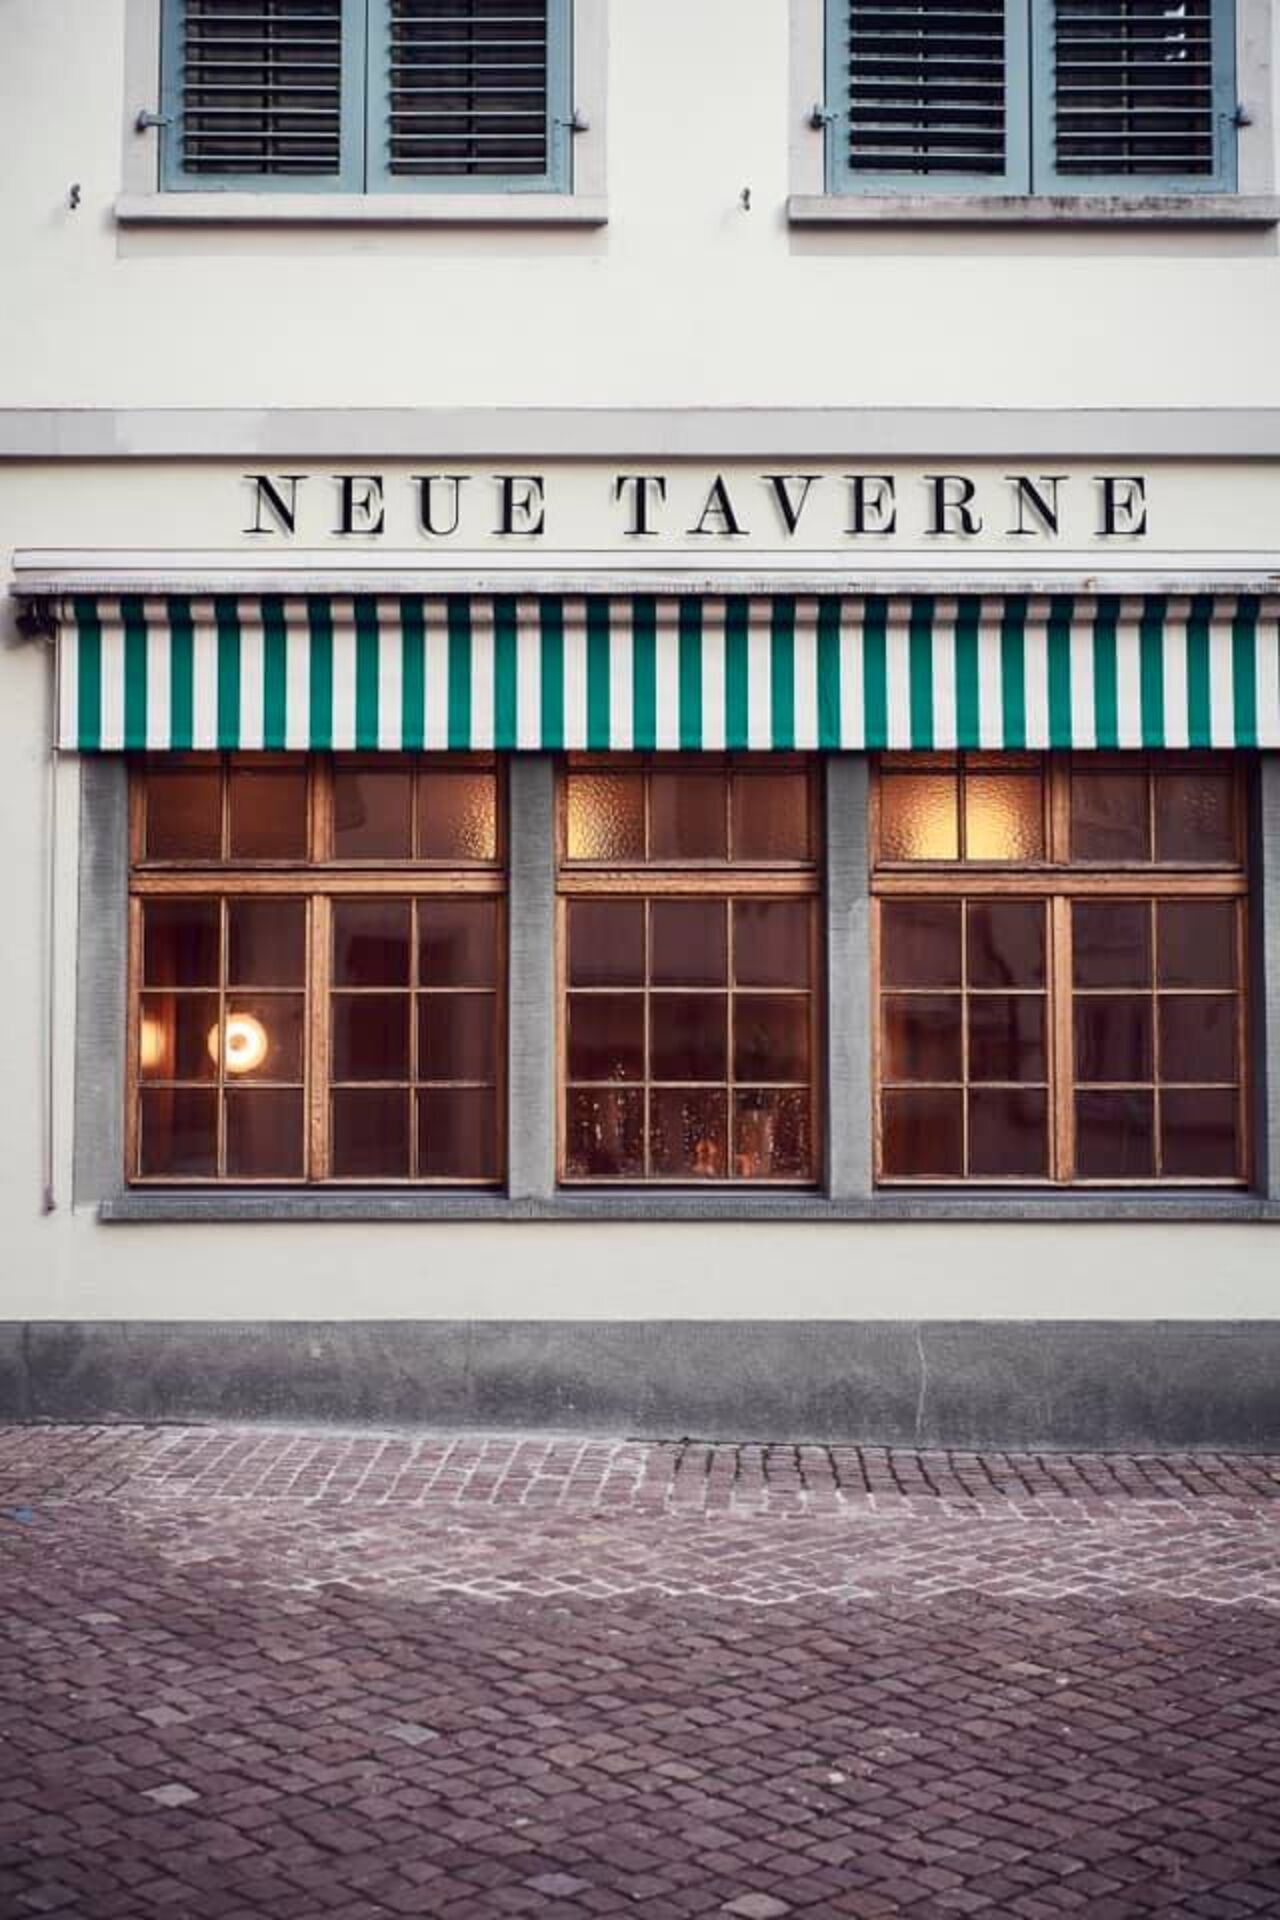 A photo of Neue Taverne